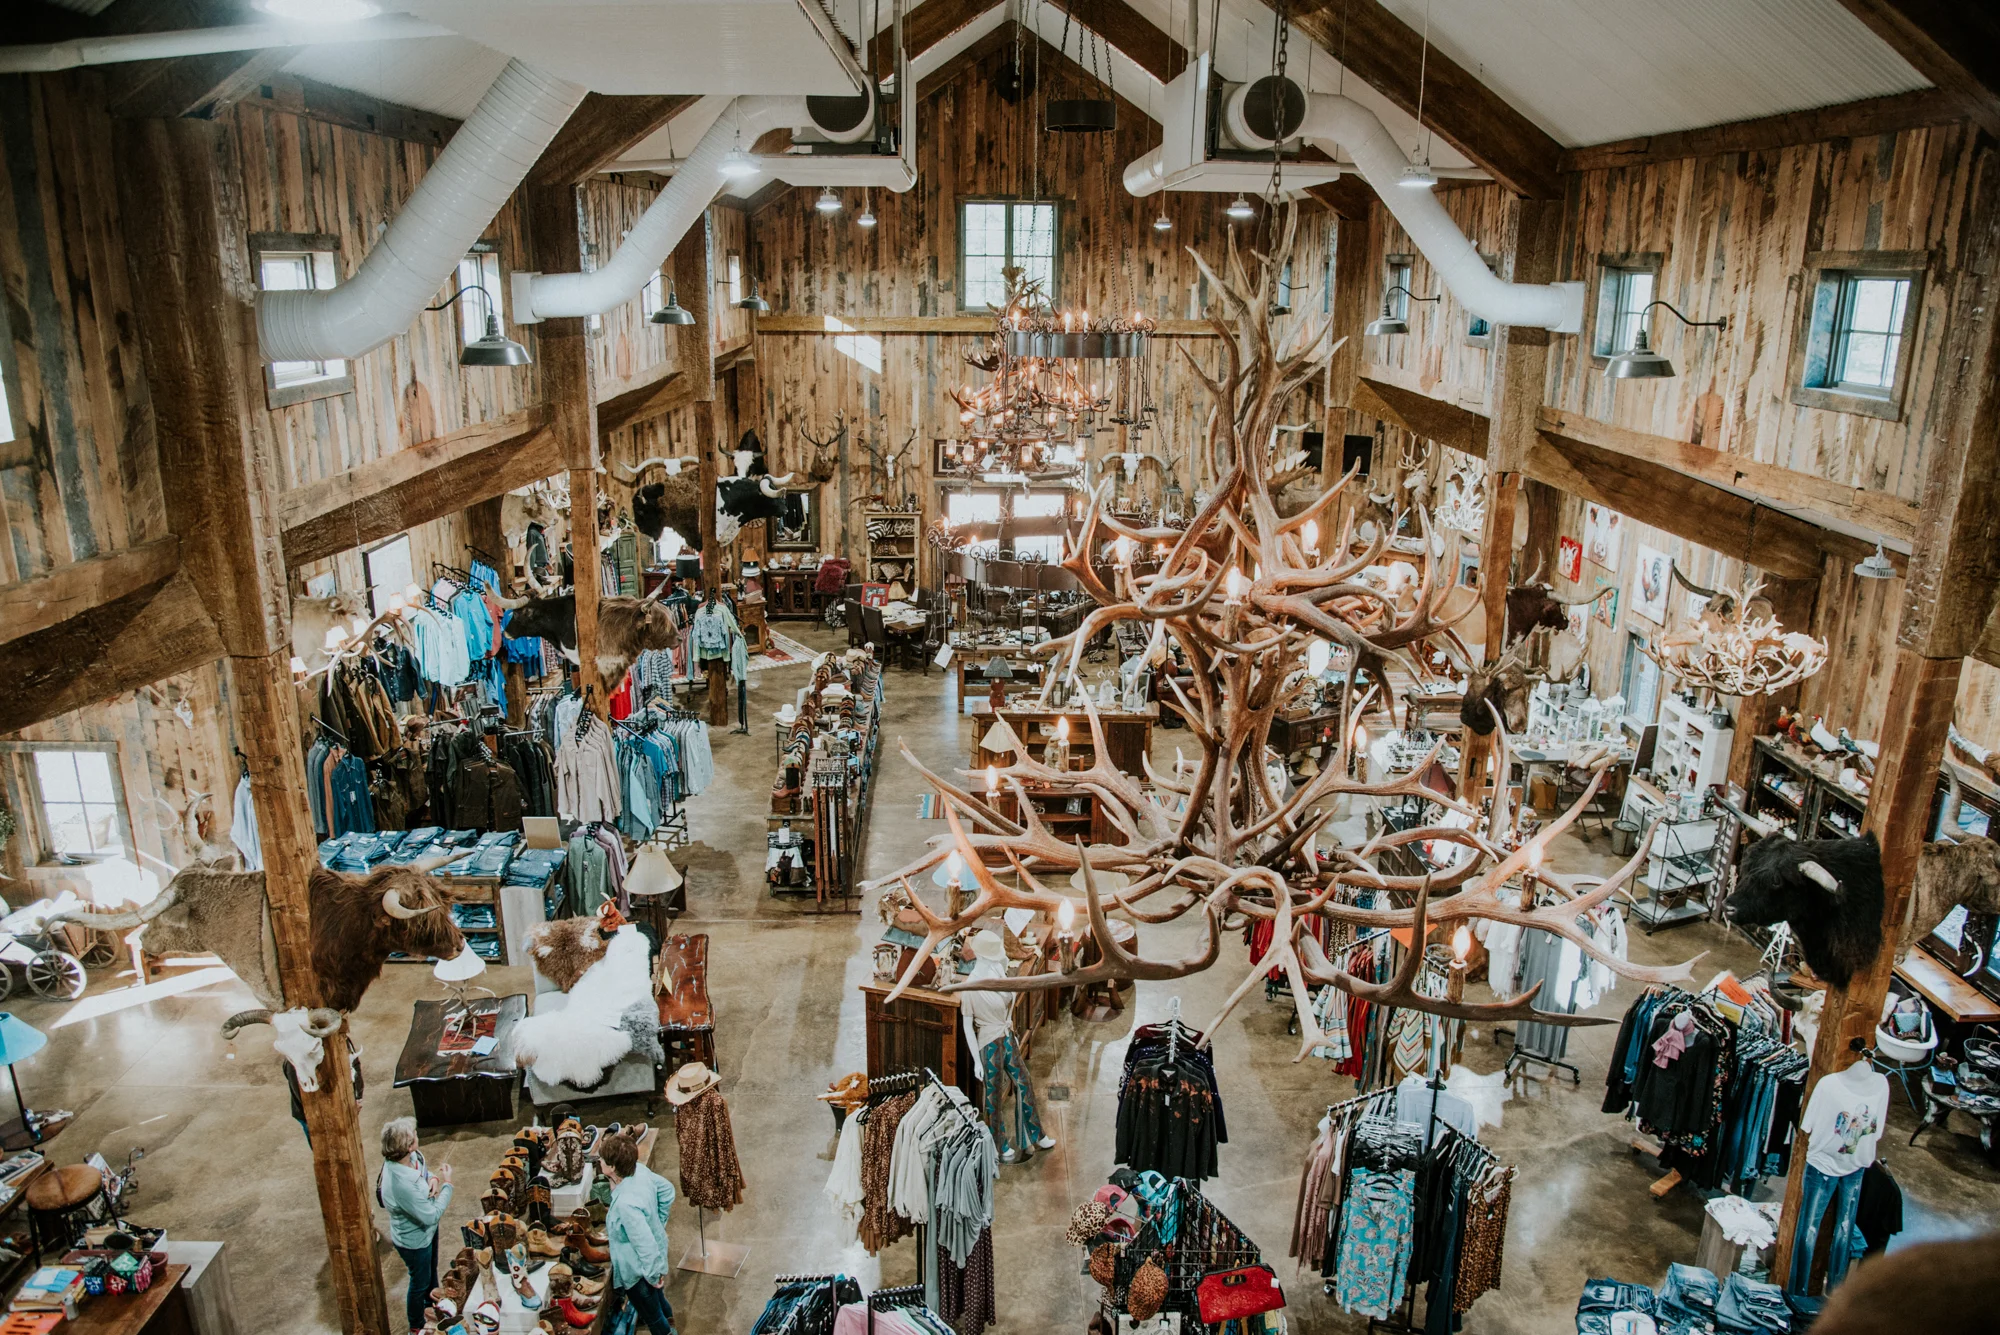 Yeehaw Saloon & Outfitters